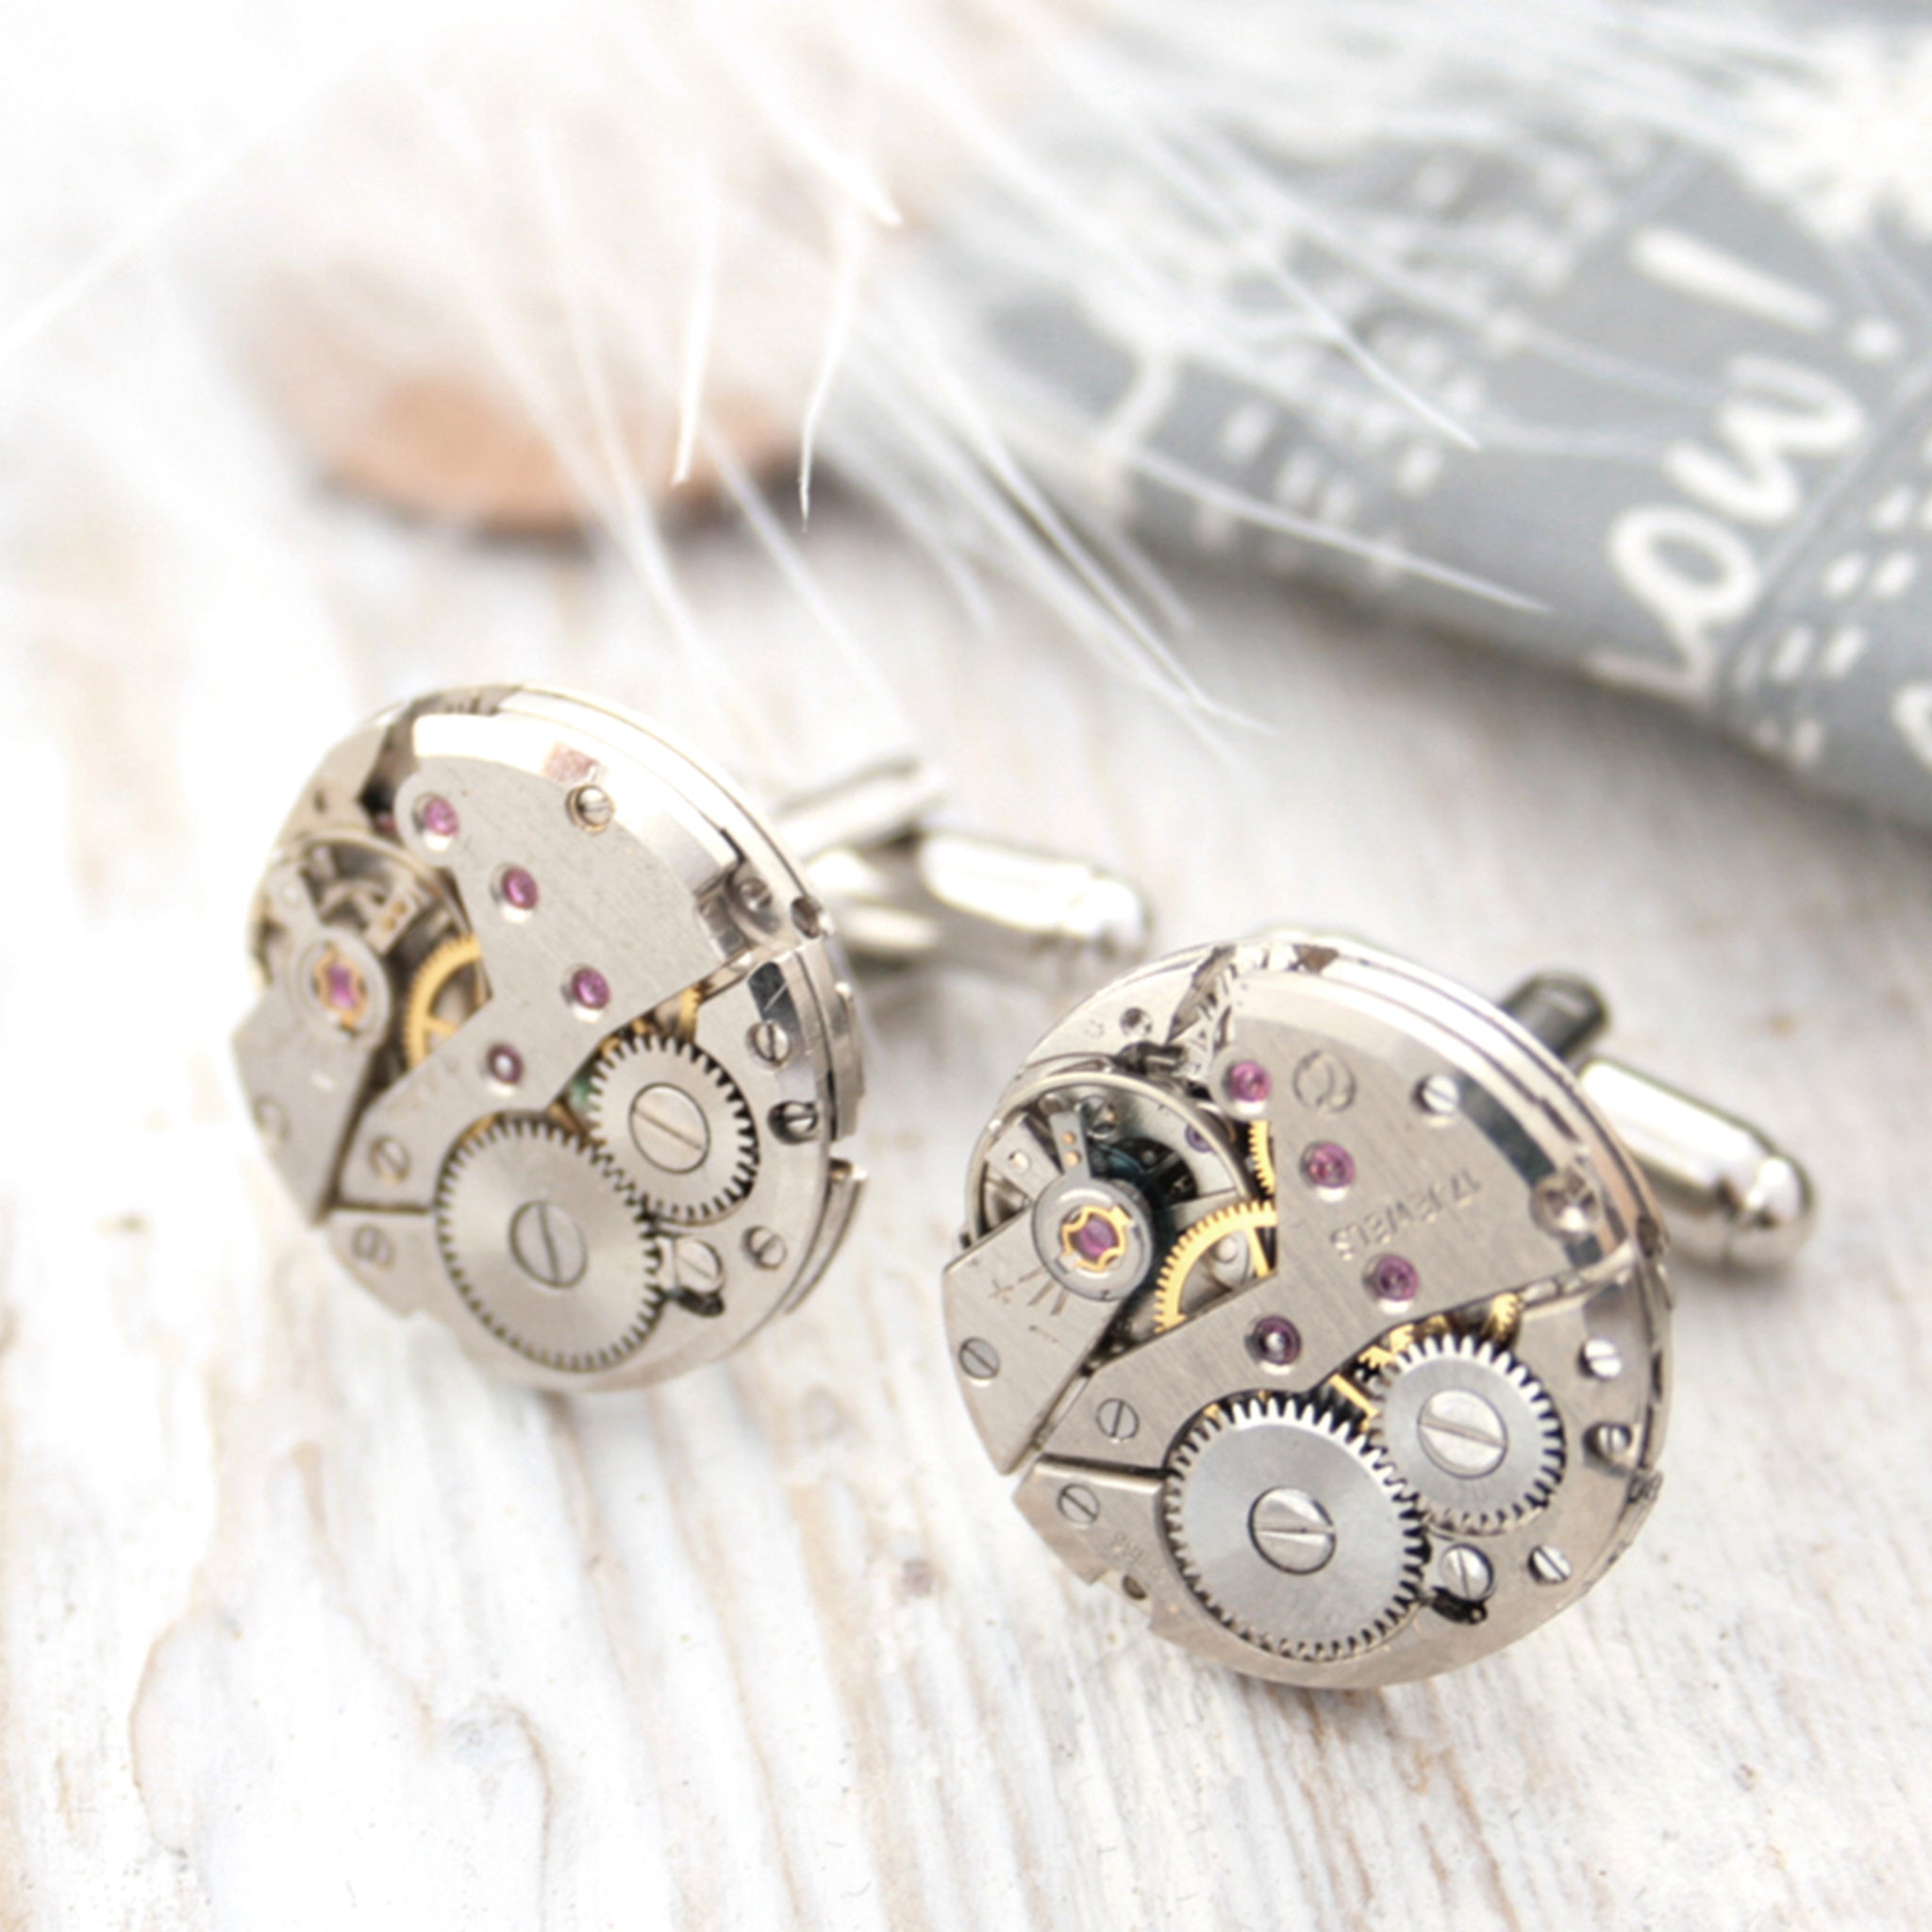 cool cufflinks for watch lovers featuring antique watch movements